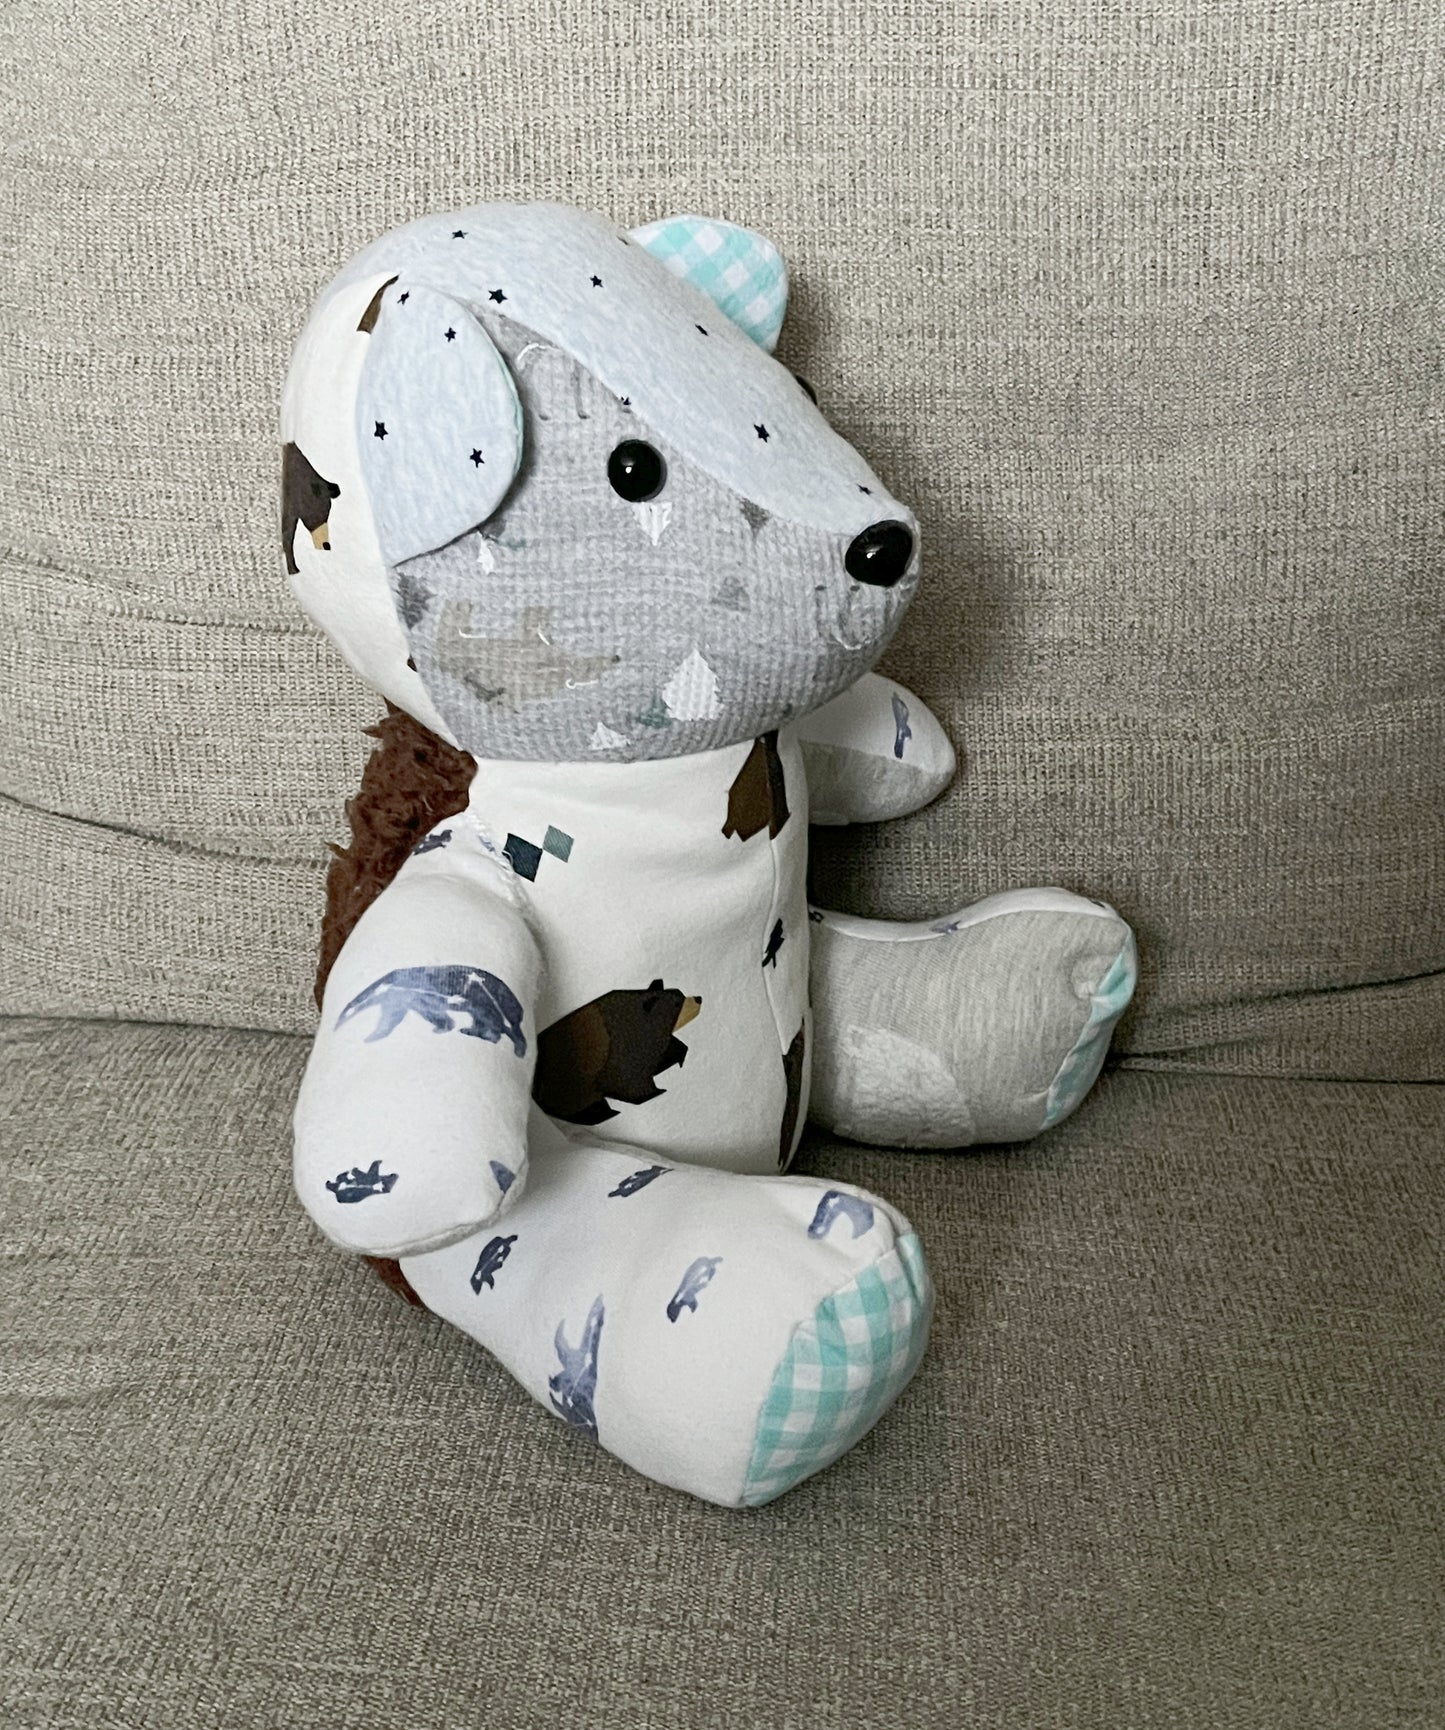 Bear made with baby clothes, 12-13" size.